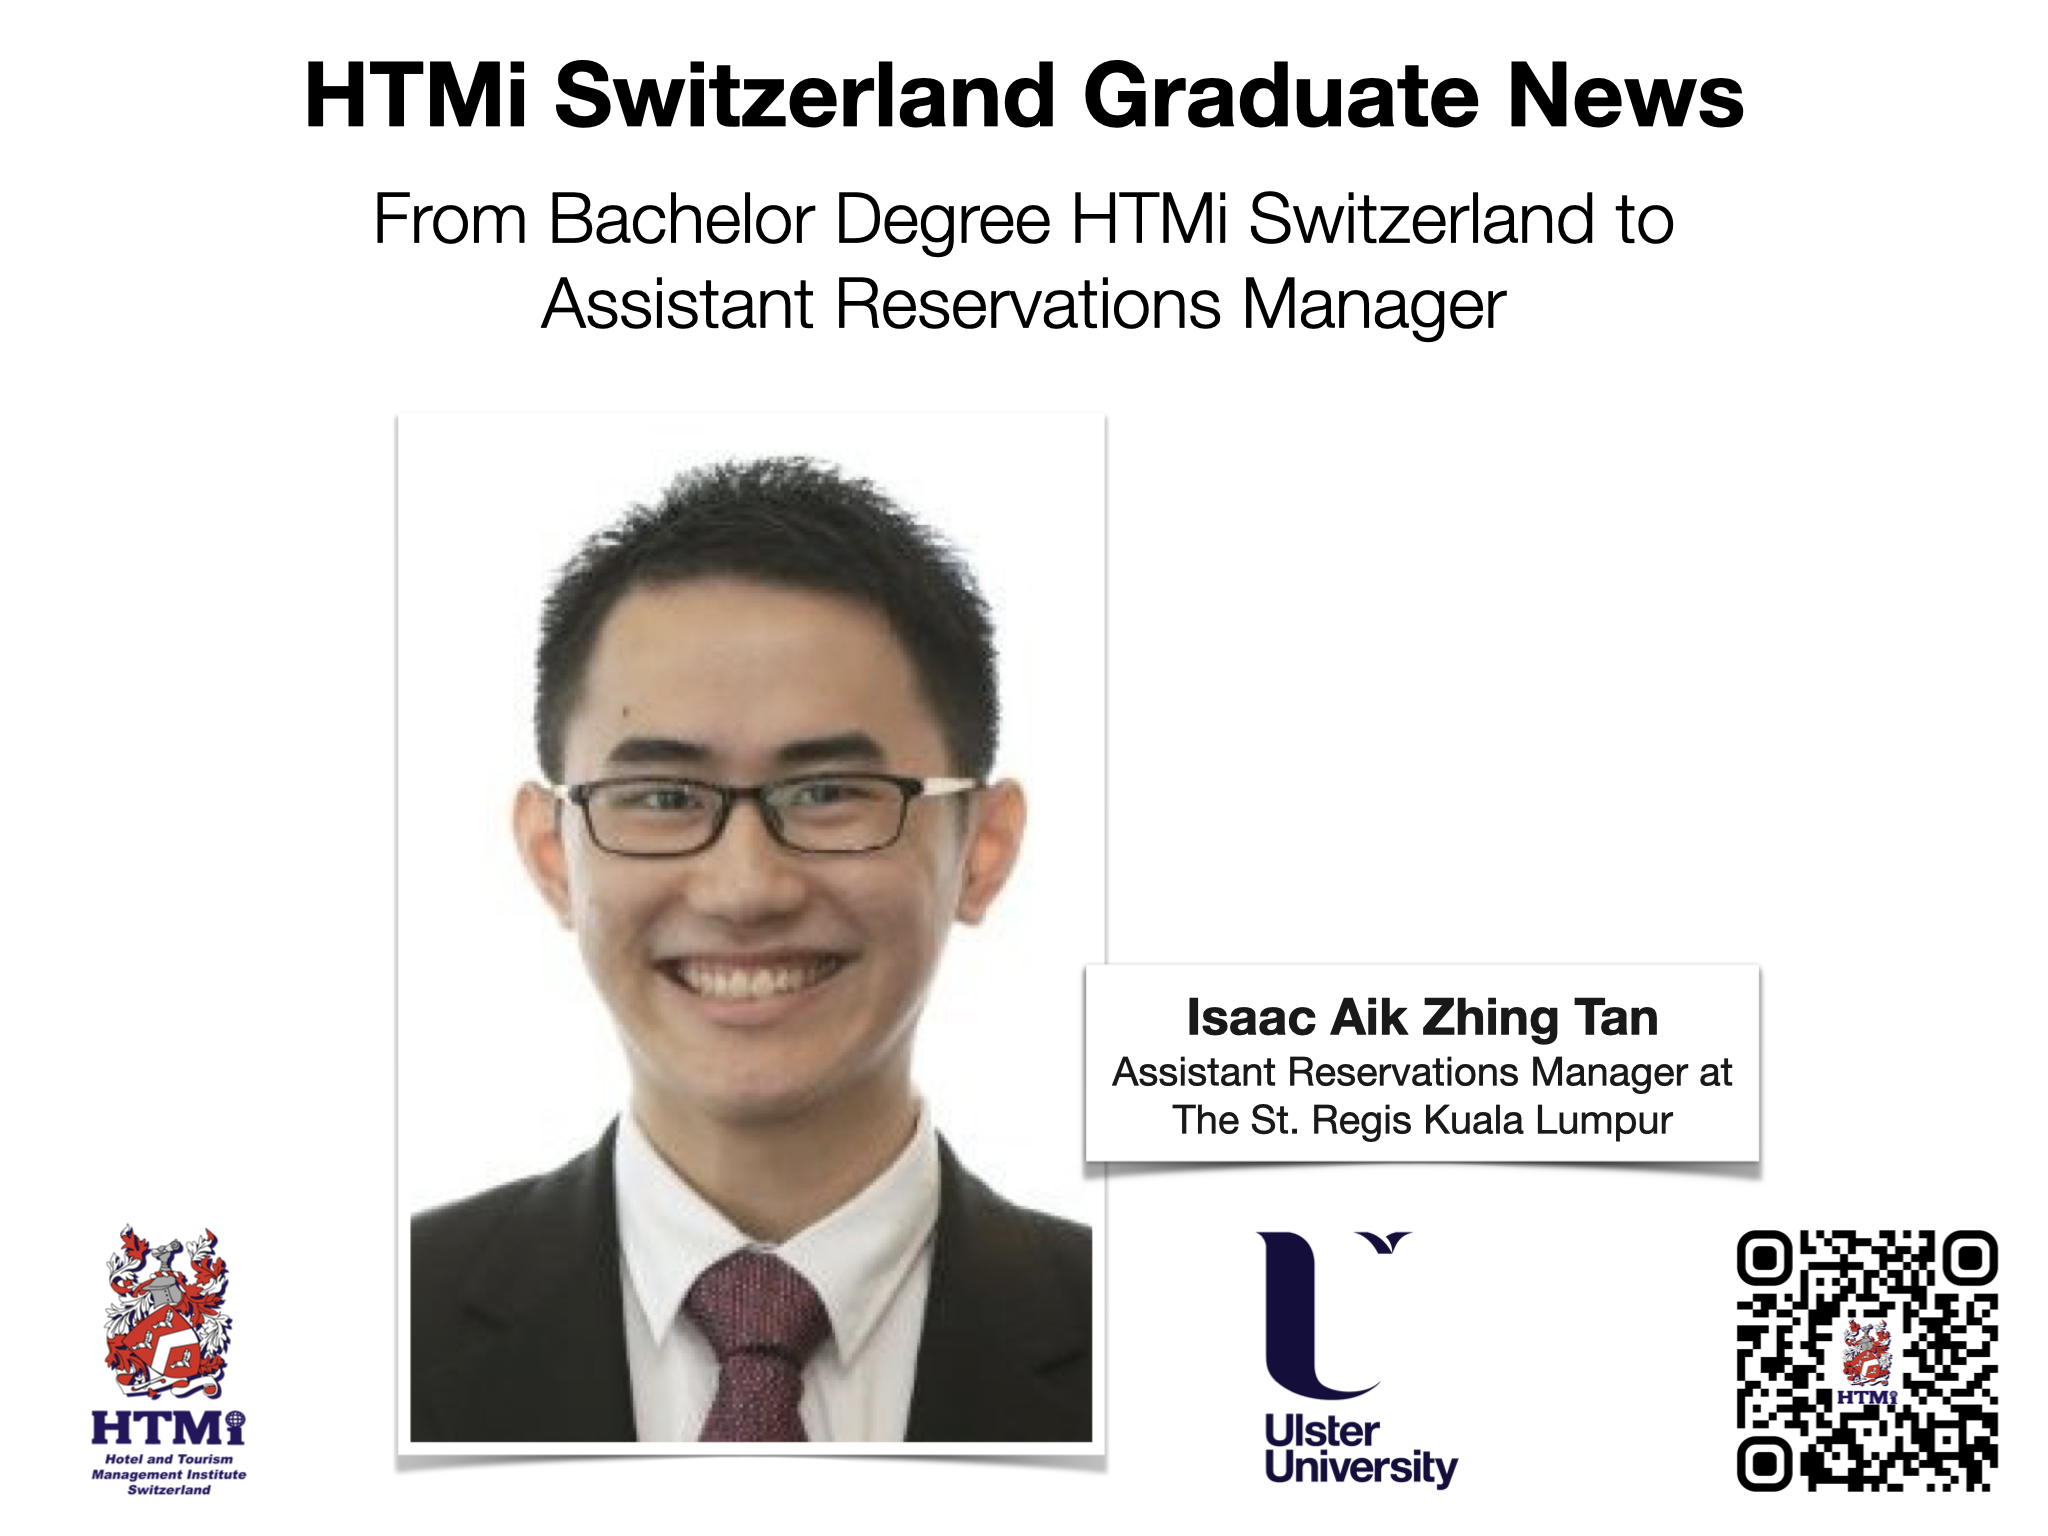 Isaac Aik Zhing Tan - From Bachelor Degree HTMi Switzerland to Assistant Reservations Manager - HTMi Switzerland Graduate News